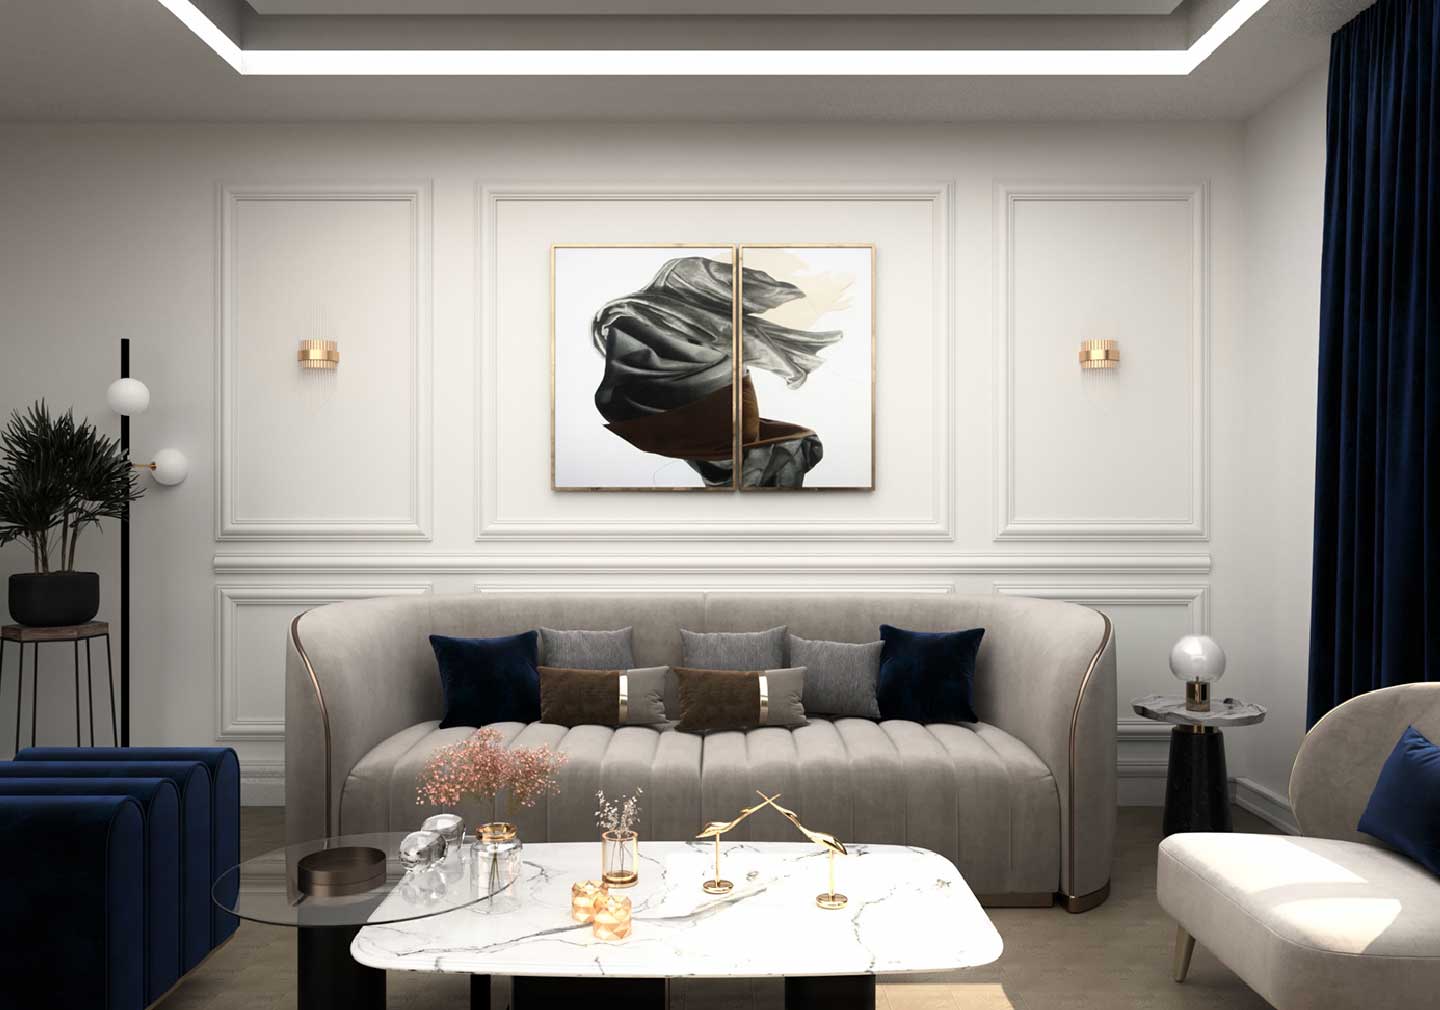 Incorporating Minimalist Art and Décor 